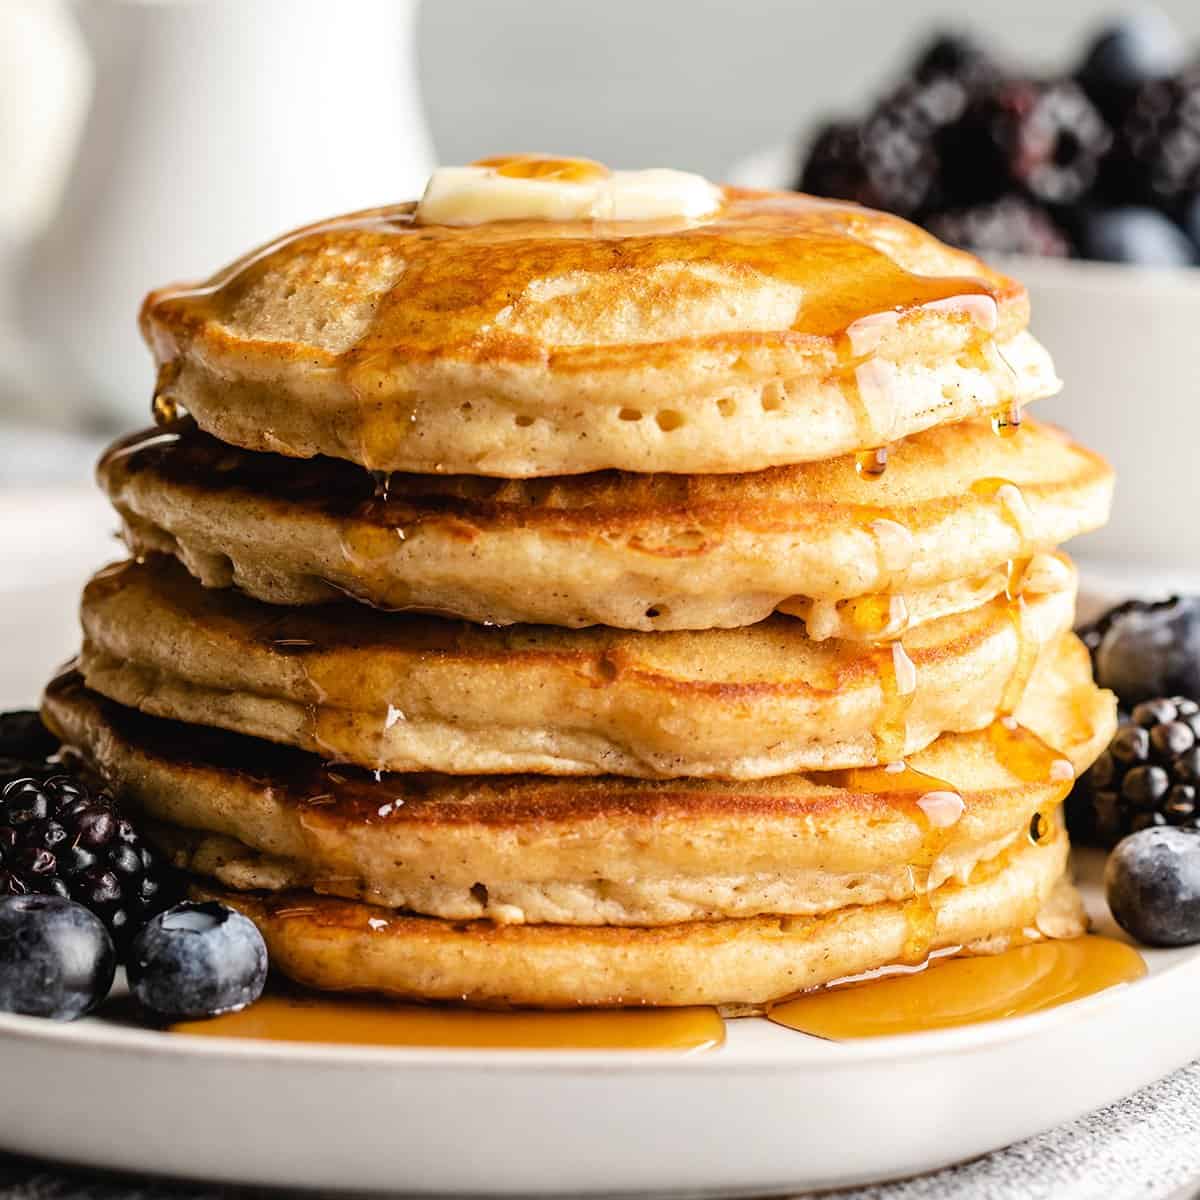 a stack of 5 fluffy pancakes from scratch